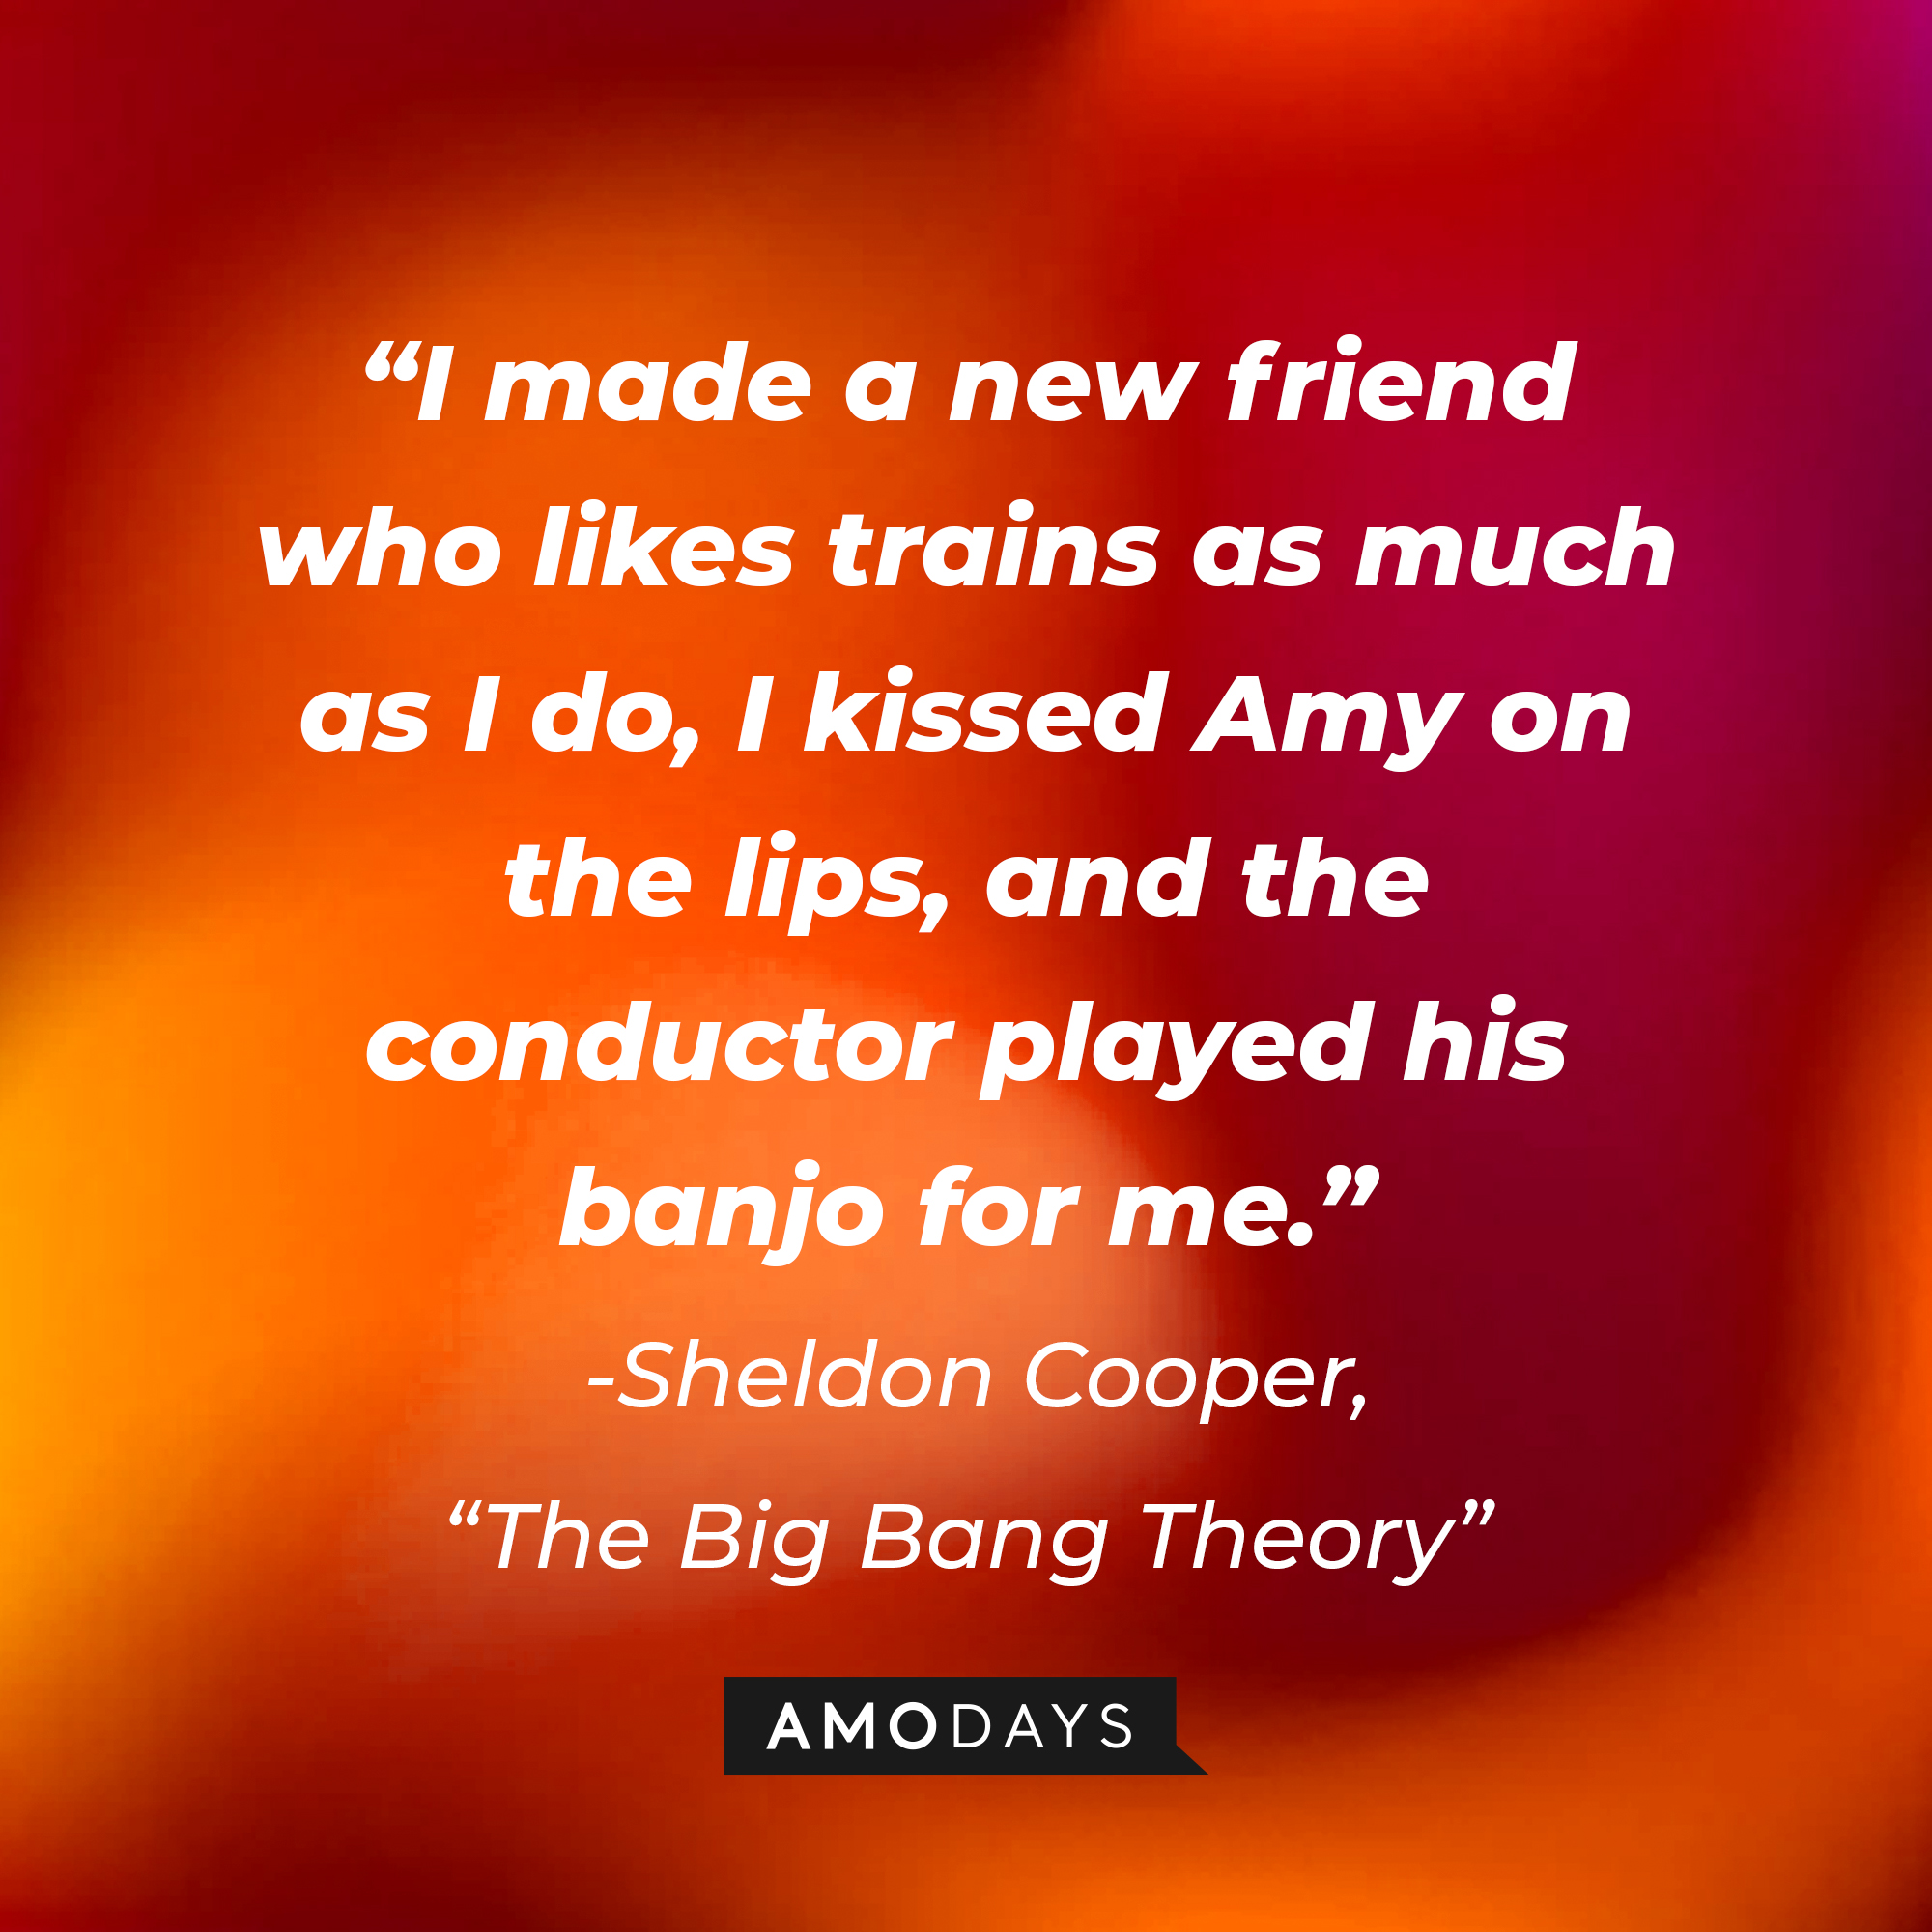 Sheldon Cooper's quote from "The Big Bang Theory": "I made a new friend who likes trains as much as I do, I kissed Amy on the lips, and the conductor played his banjo for me." | Source: Amodays